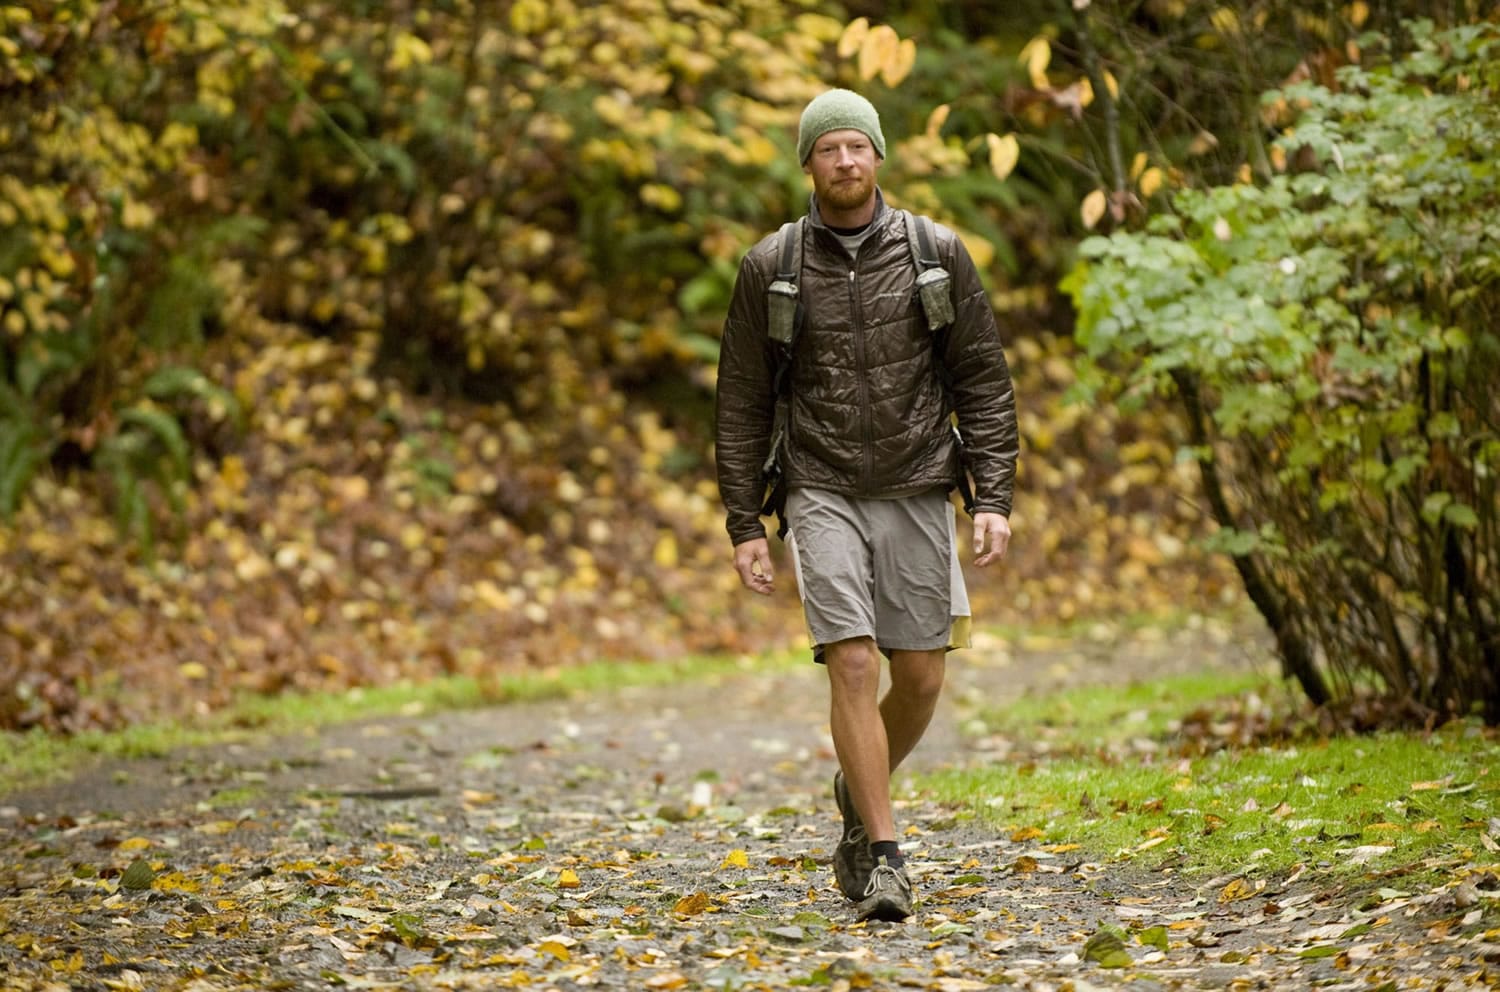 Kevin DeGraw of Vancouver, 32, who has hiked the Appalachian Trail, the Pacific Crest Trail and the Continental Divide Trail in the past four years, takes on the Cougar Creek Trail in Vancouver last week.